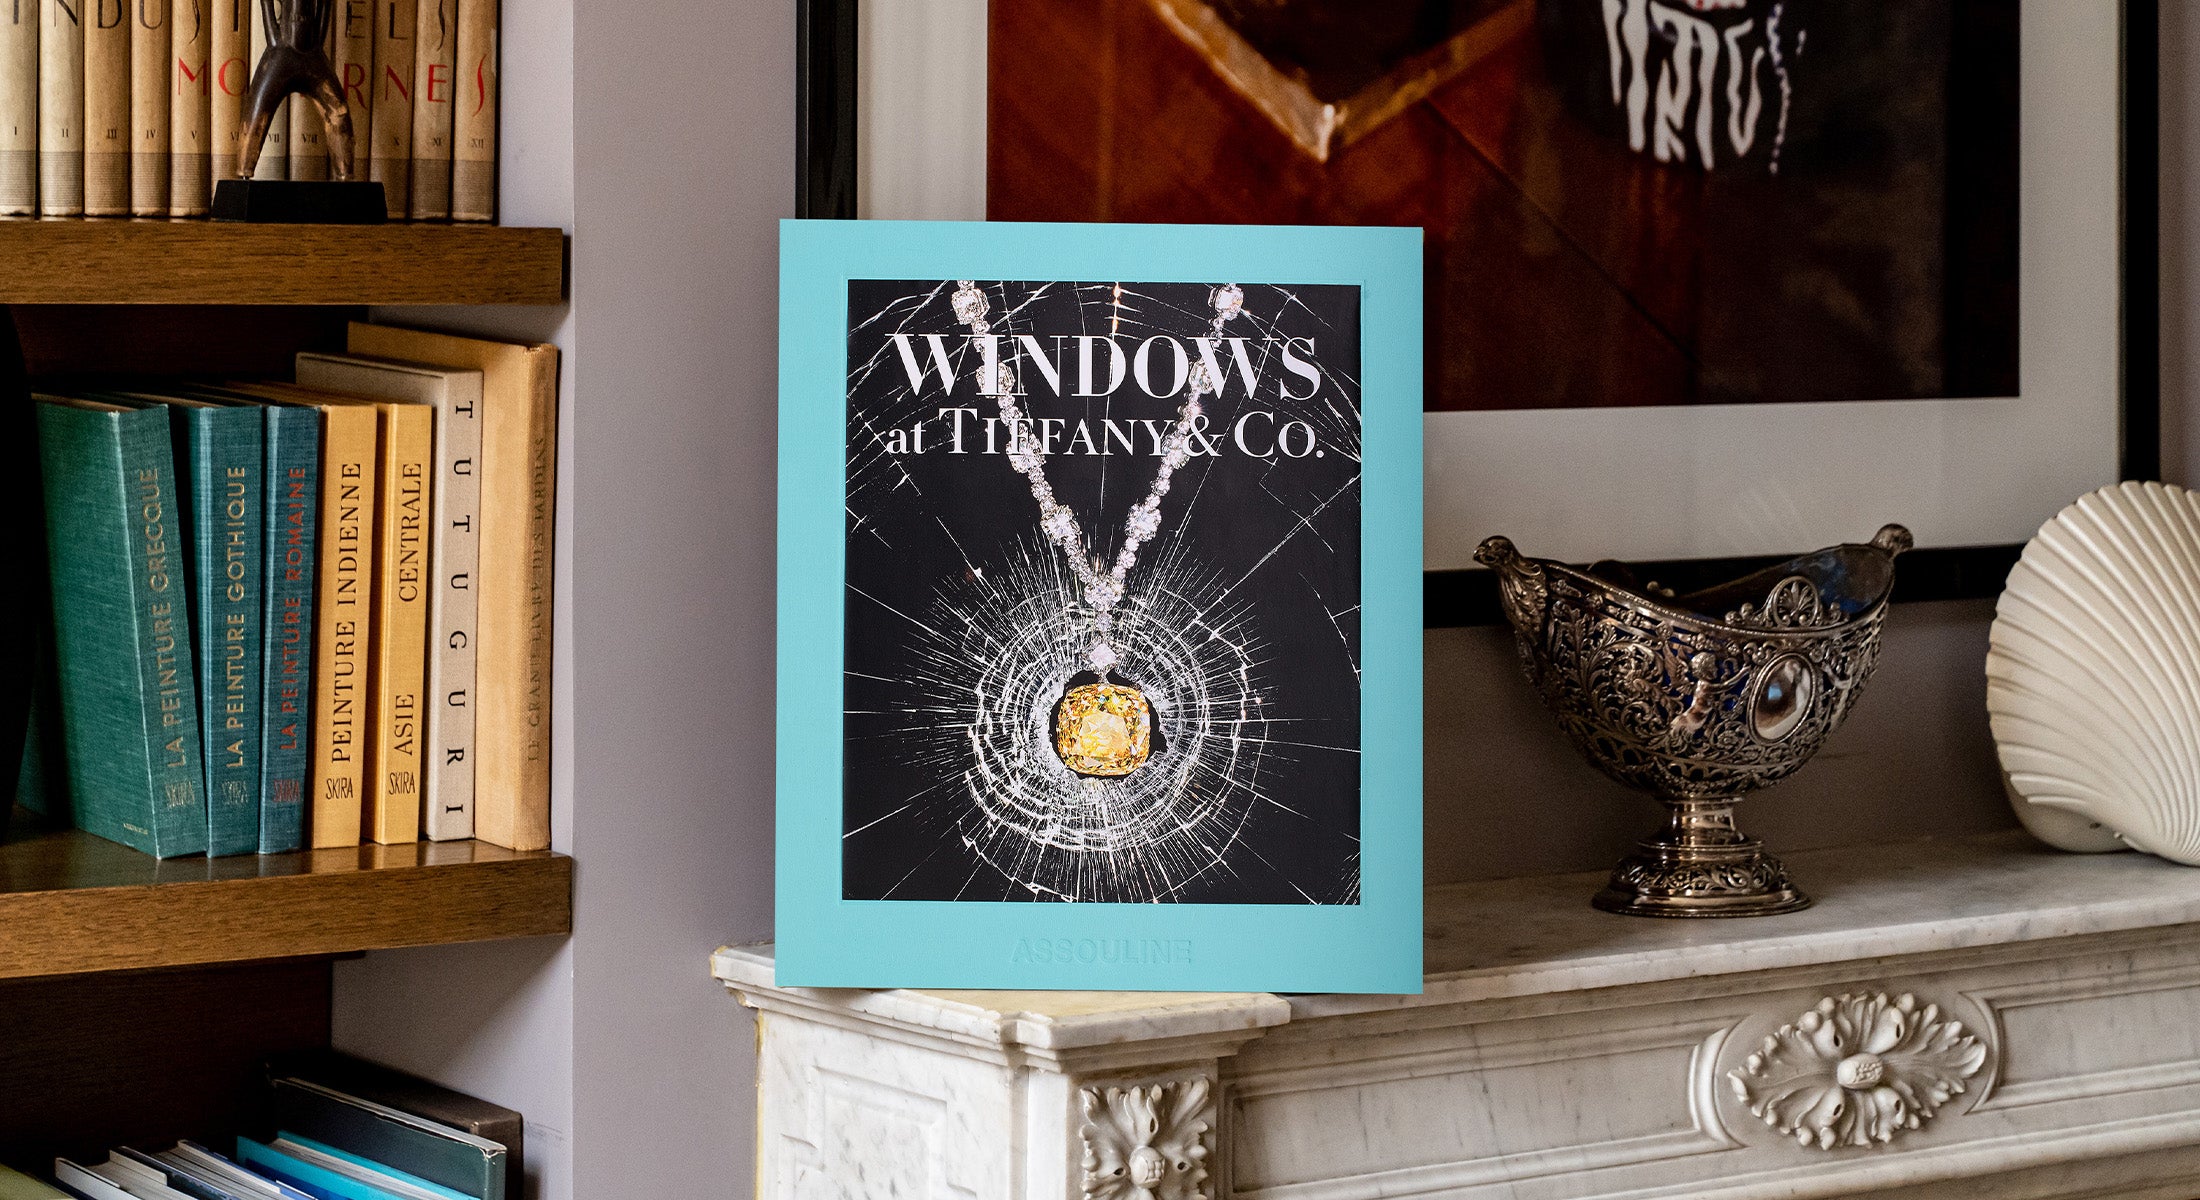 Windows at Tiffany and Co. book | ASSOULINE